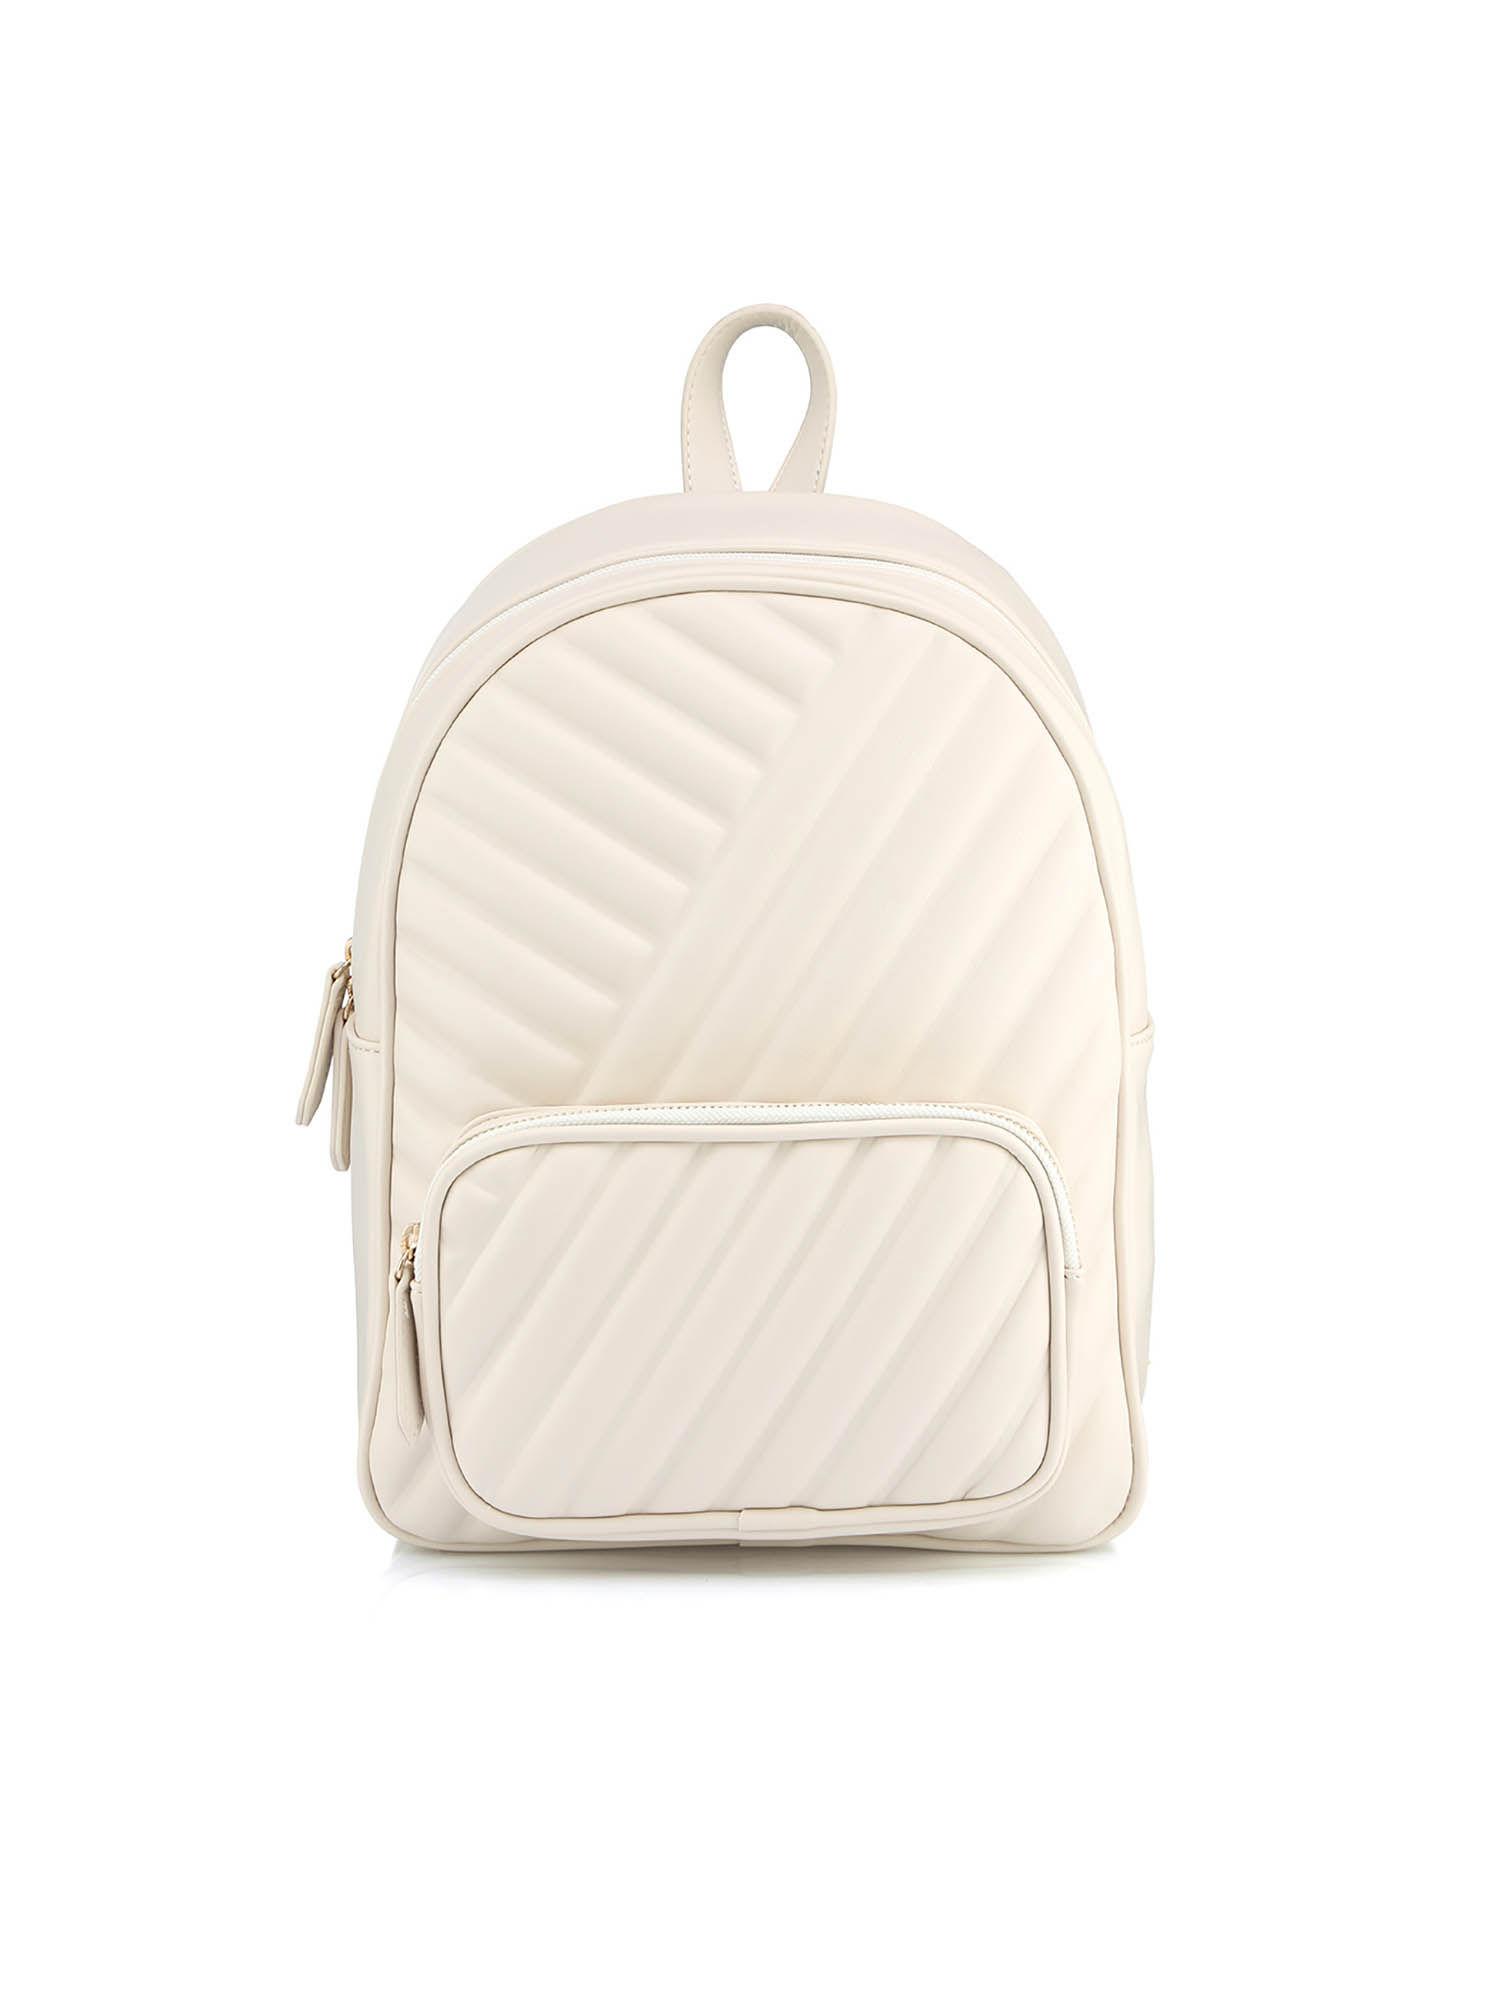 white patterned backpack